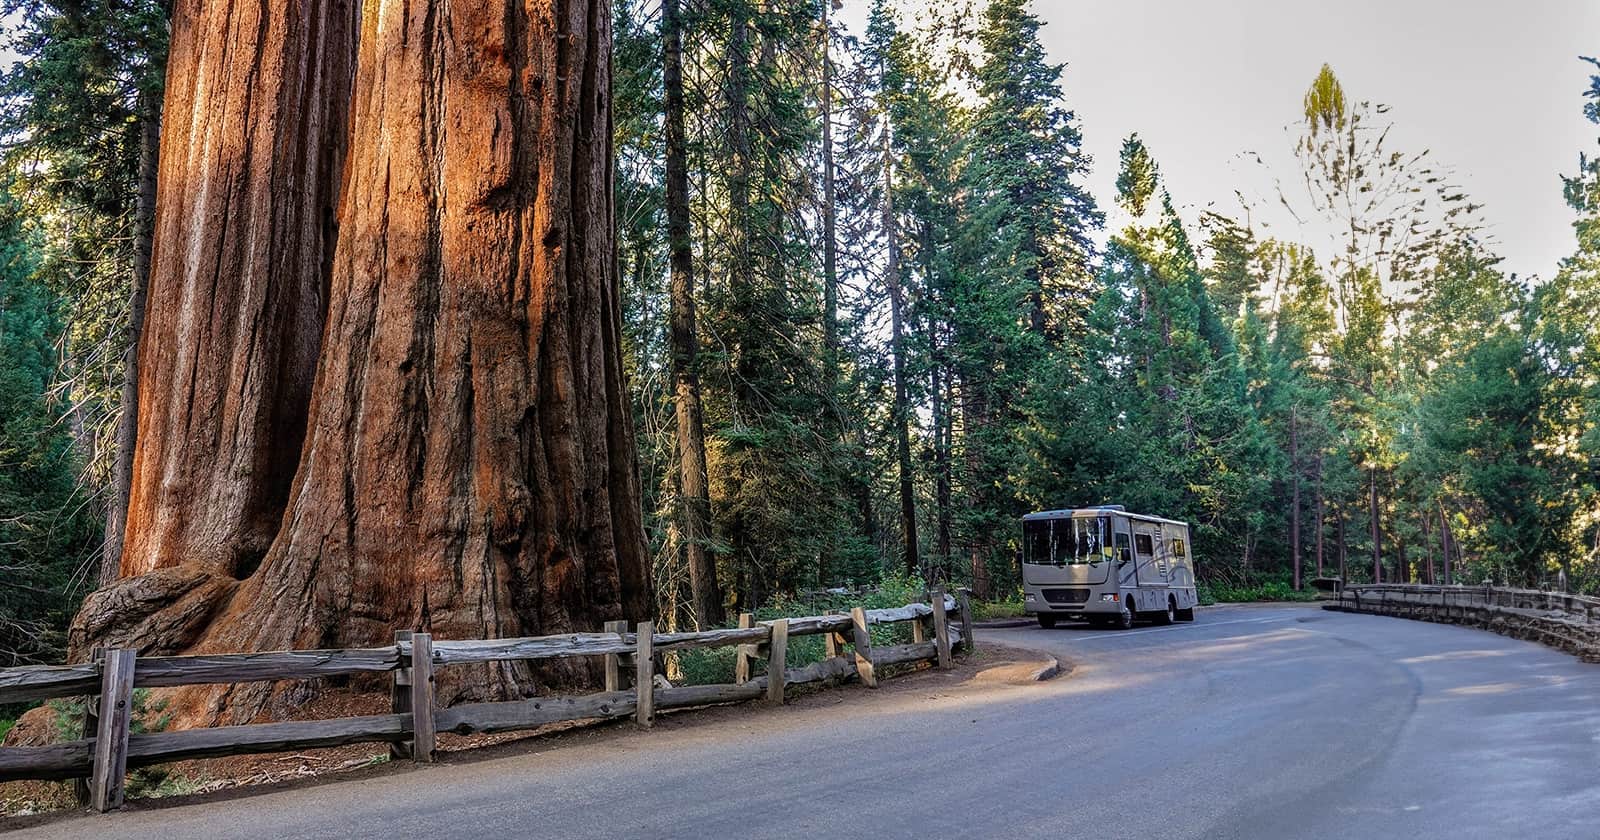 RV next to a Giant redwood tree in California.